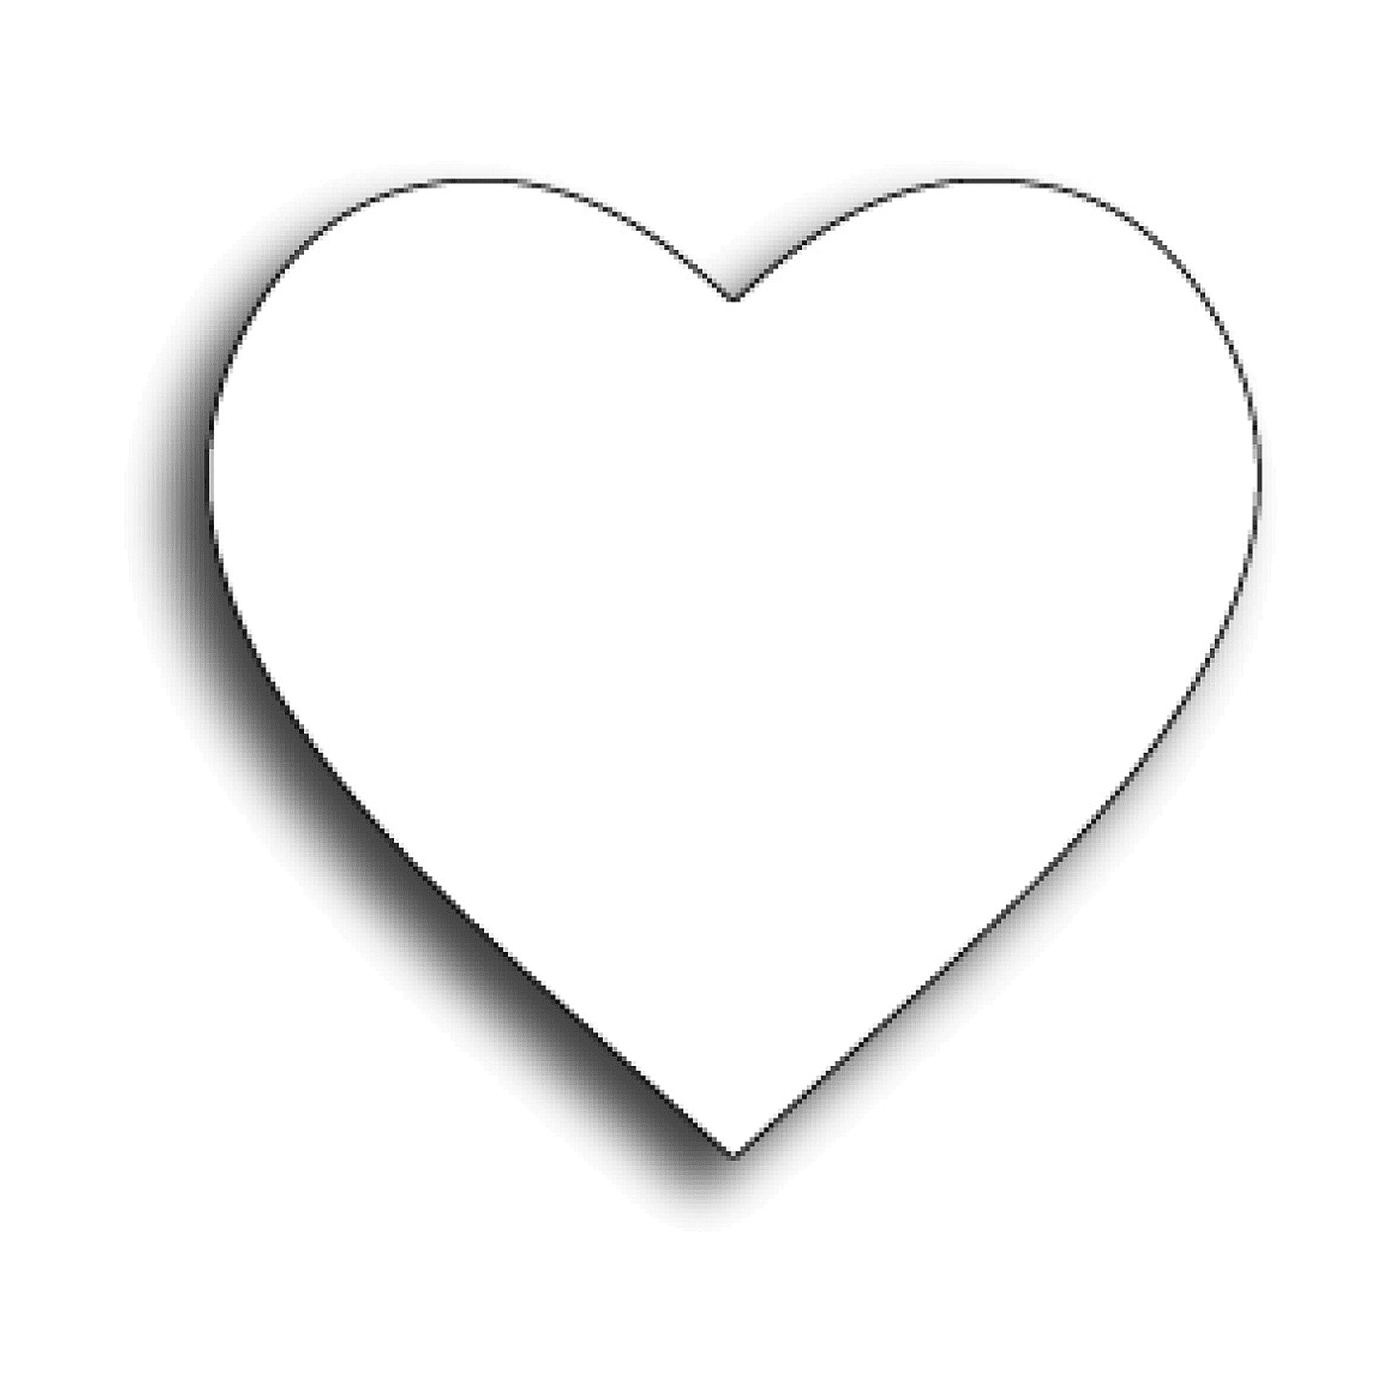  A white heart without a background 